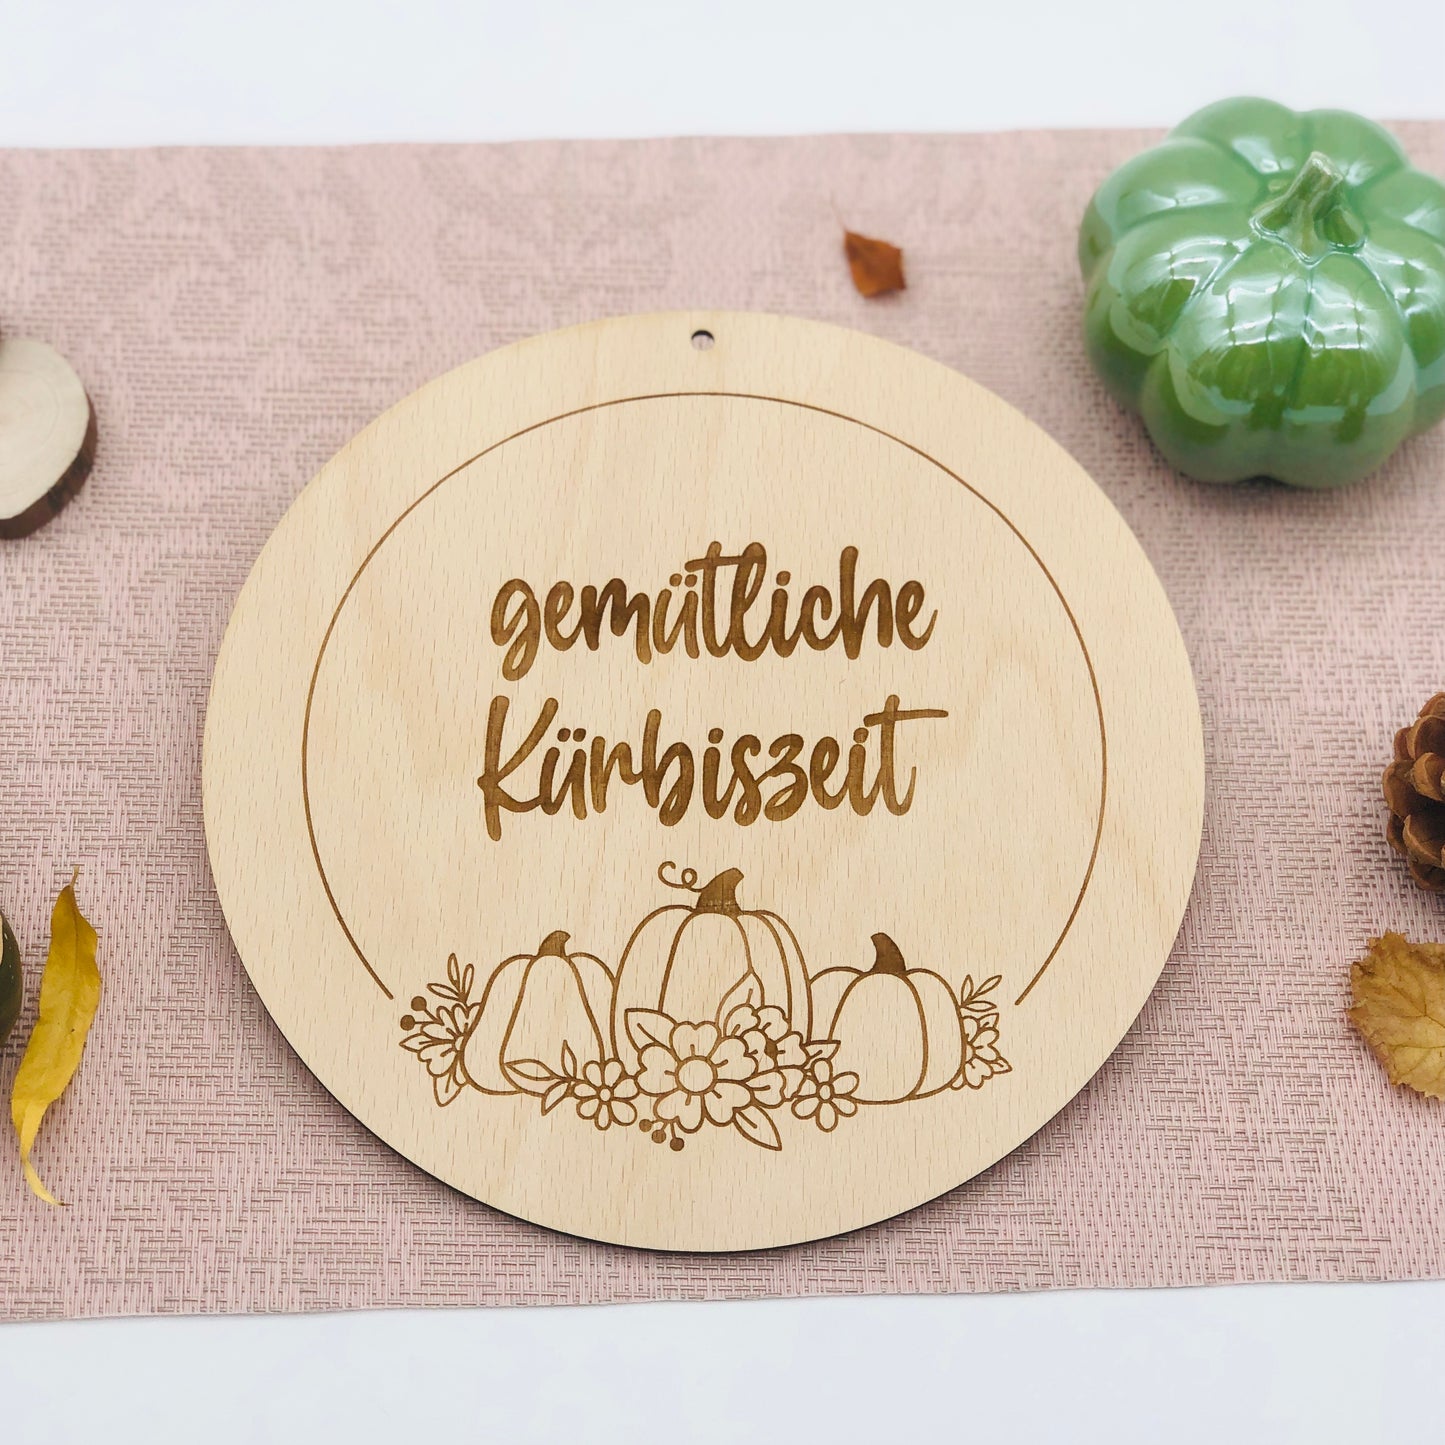 Wooden sign autumn decoration - cozy autumn time - cozy pumpkin time - sign for hanging - gift idea autumn - farmhouse wall decoration